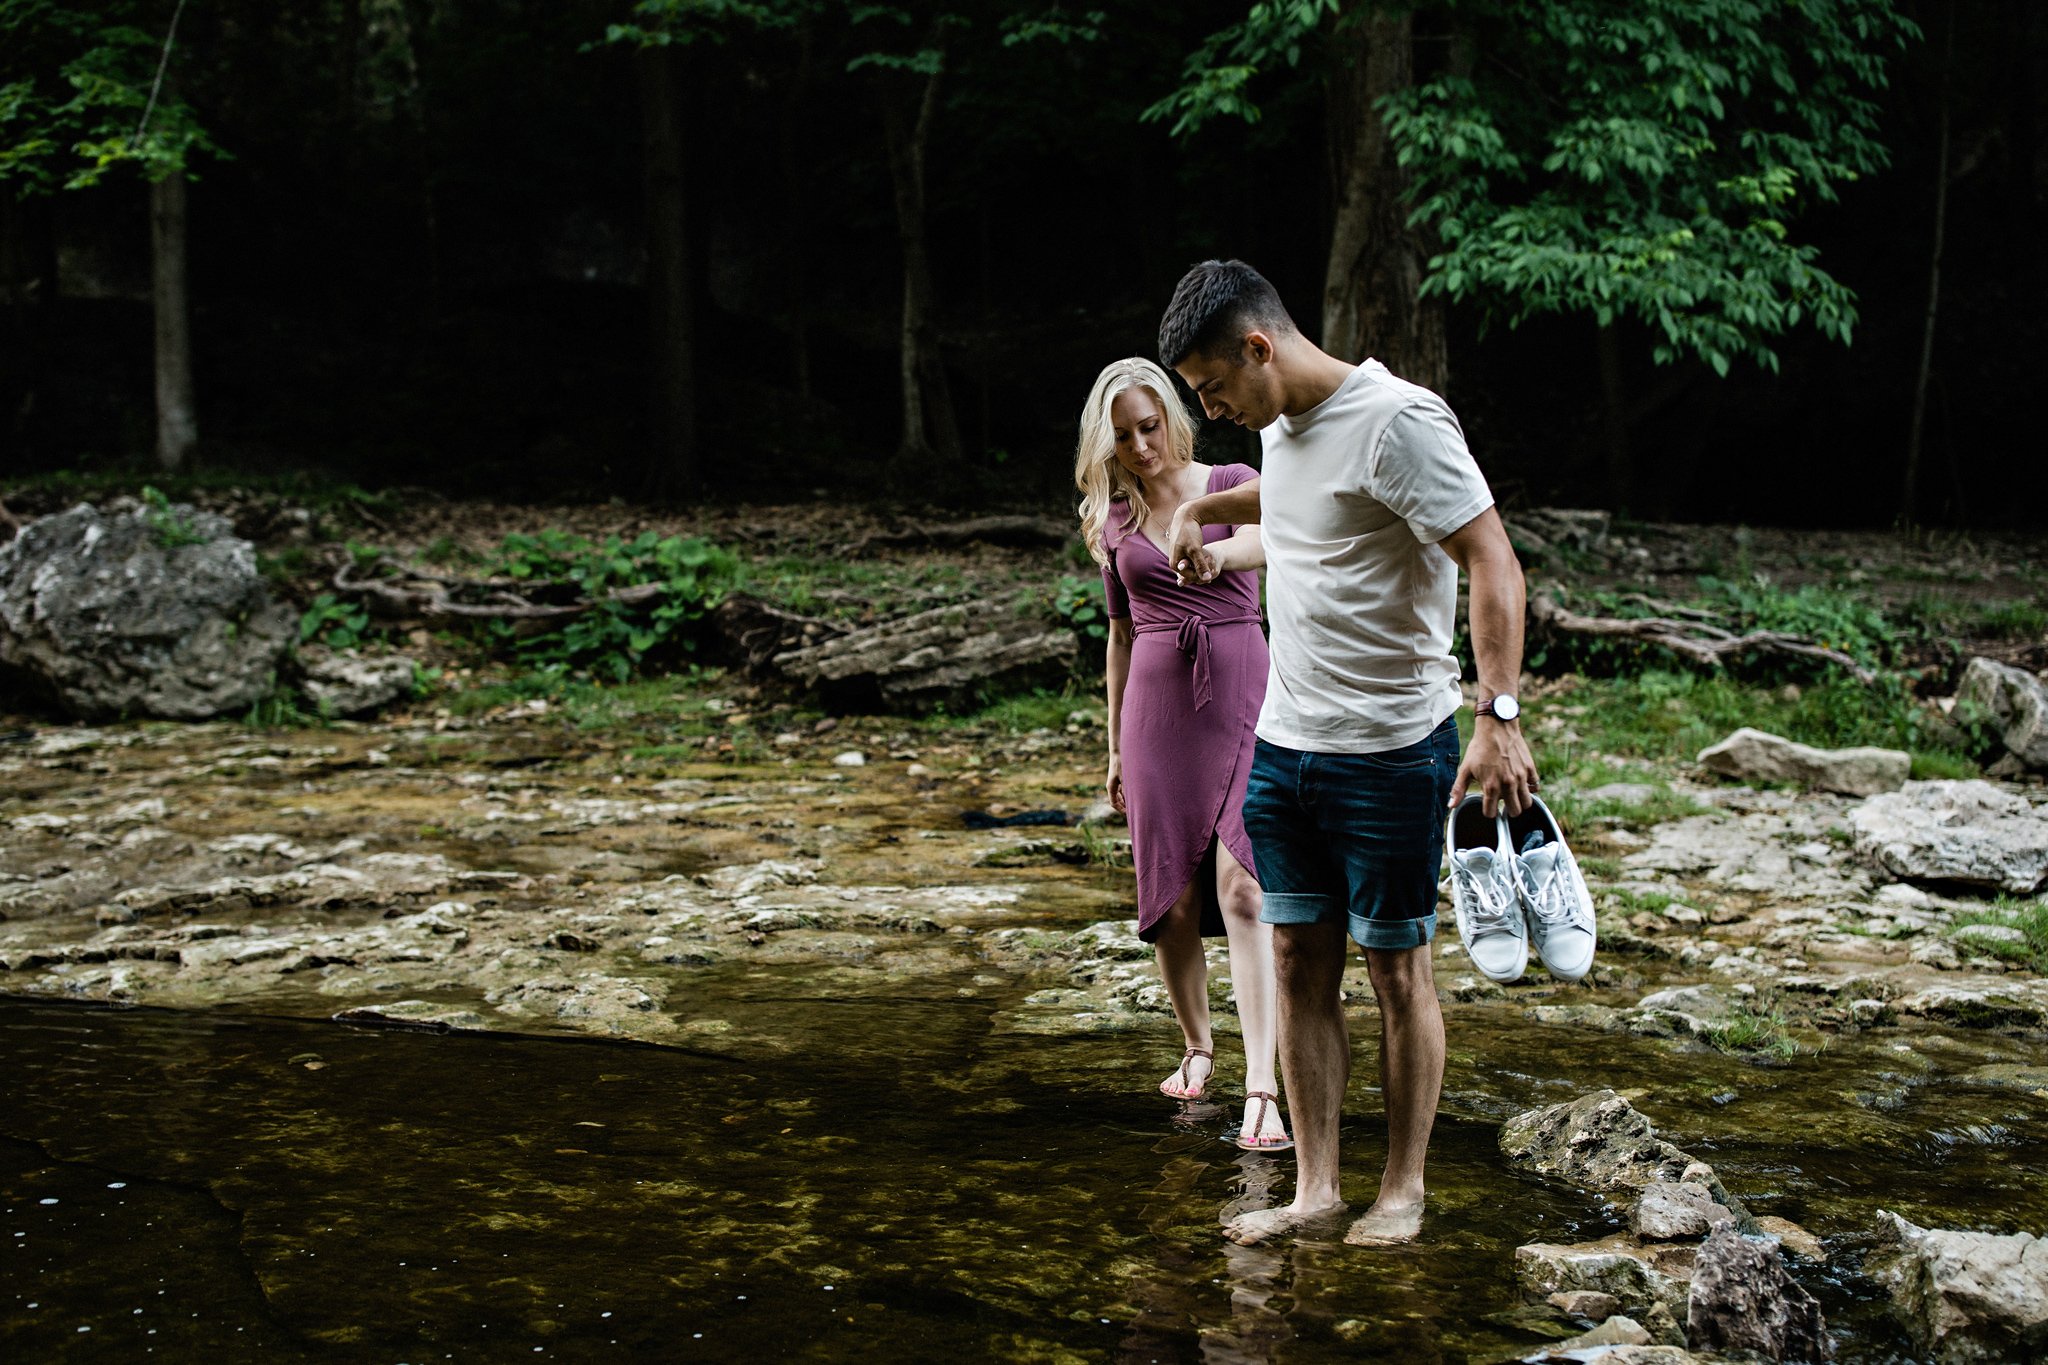 230-summer-elora-gorge-sunset-engagement-session-with-couple-in-the-water.jpg